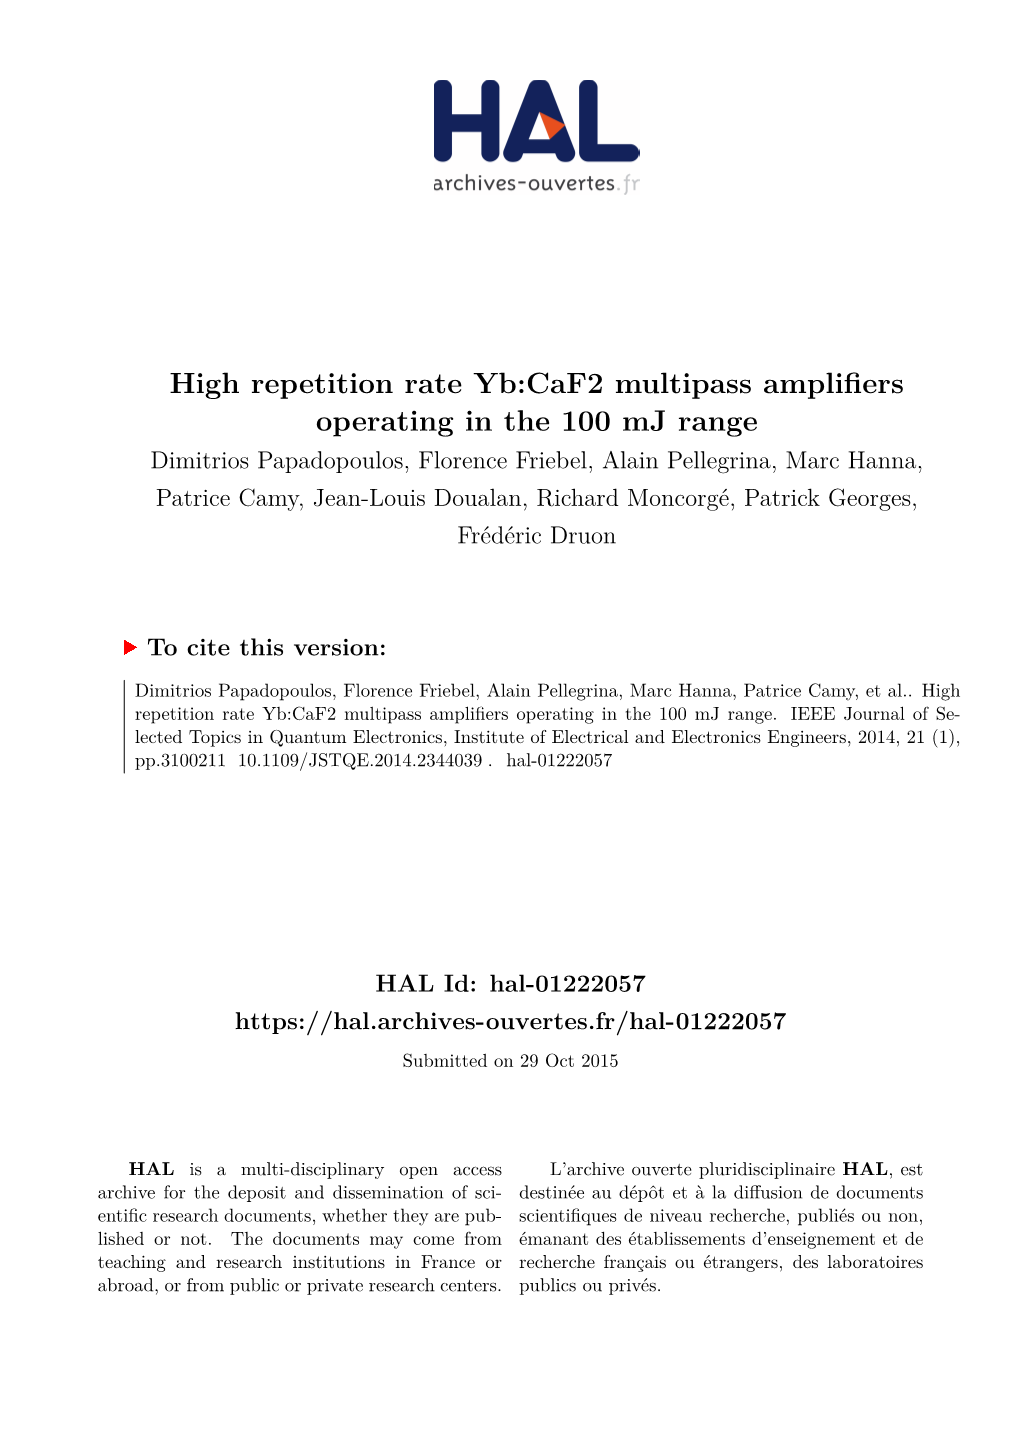 High Repetition Rate Yb:Caf2 Multipass Amplifiers Operating In